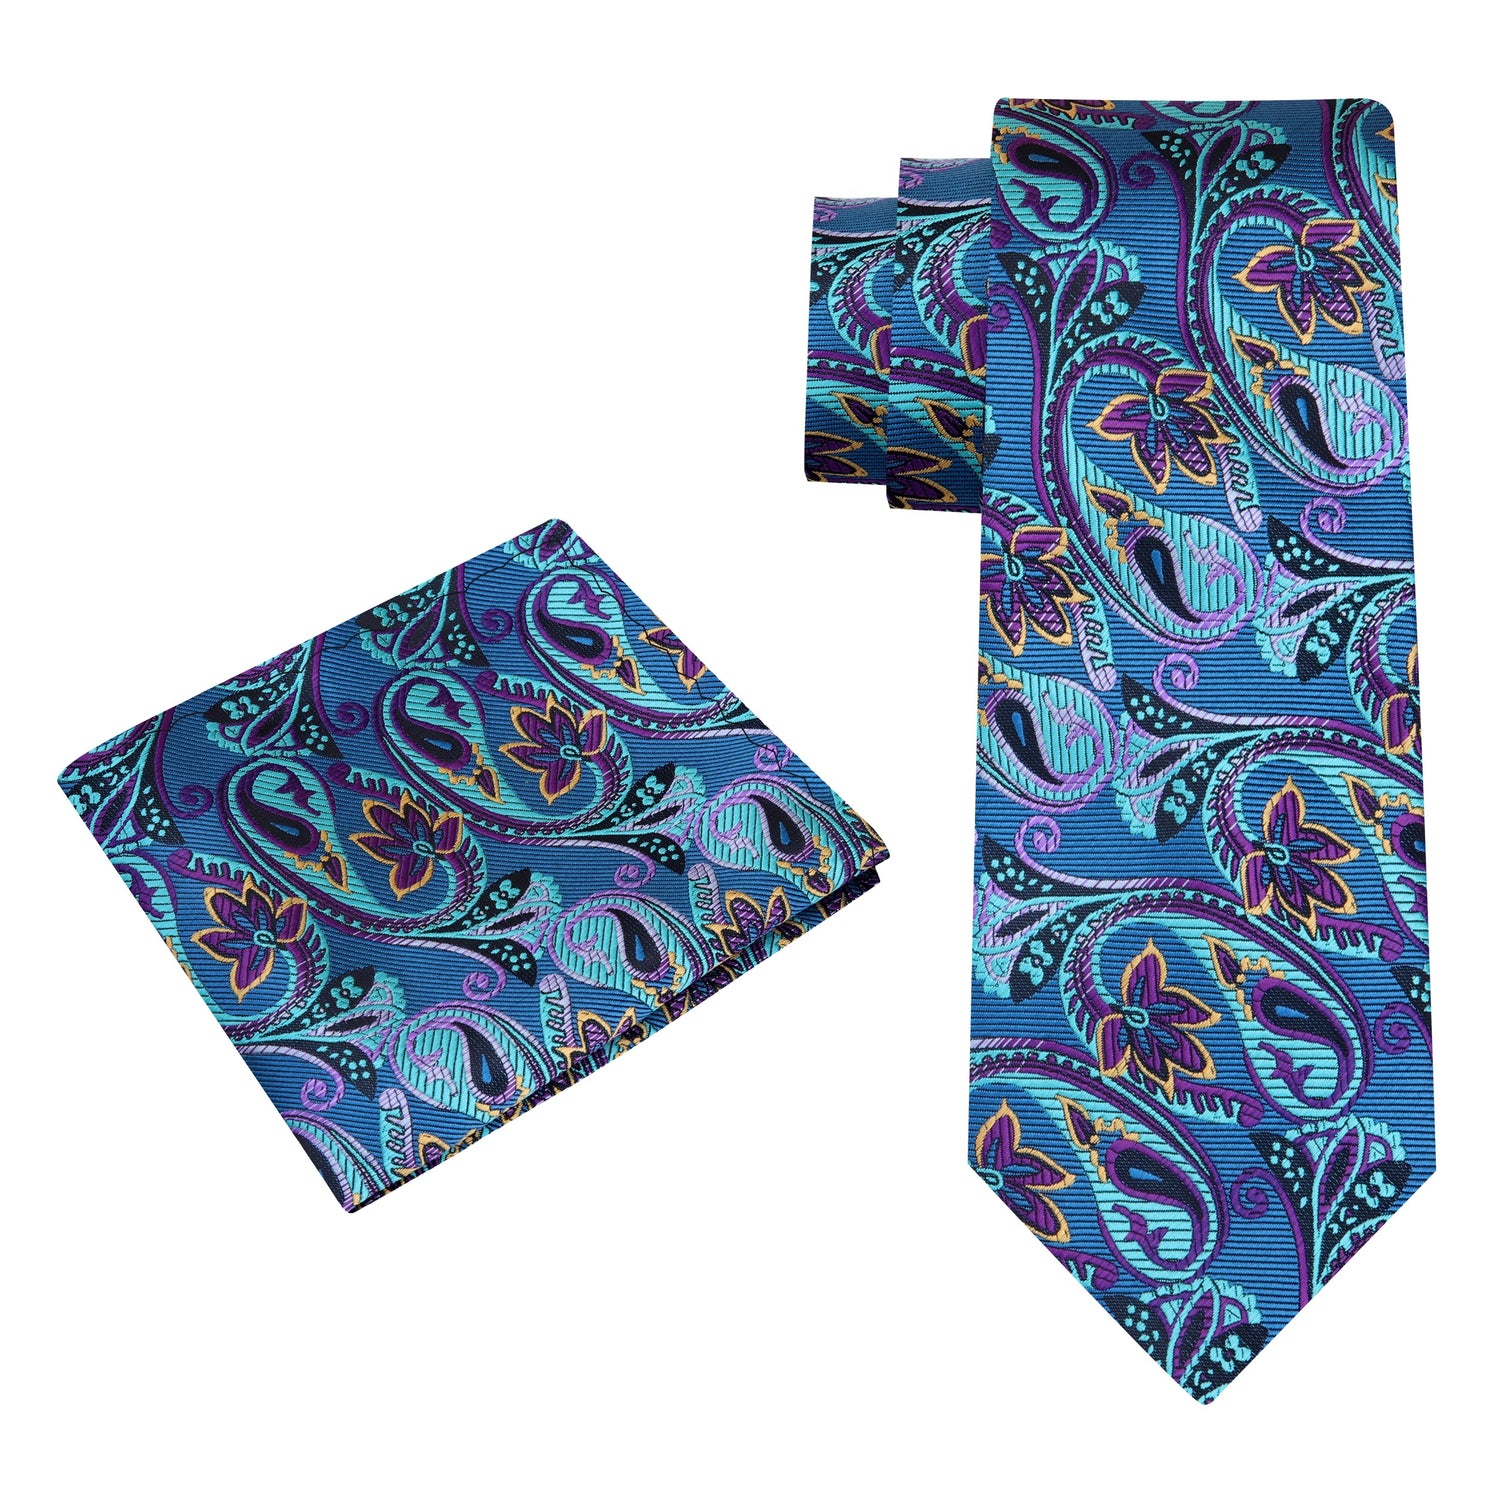 View 2: Teal Paisley Tie and Pocket Square|